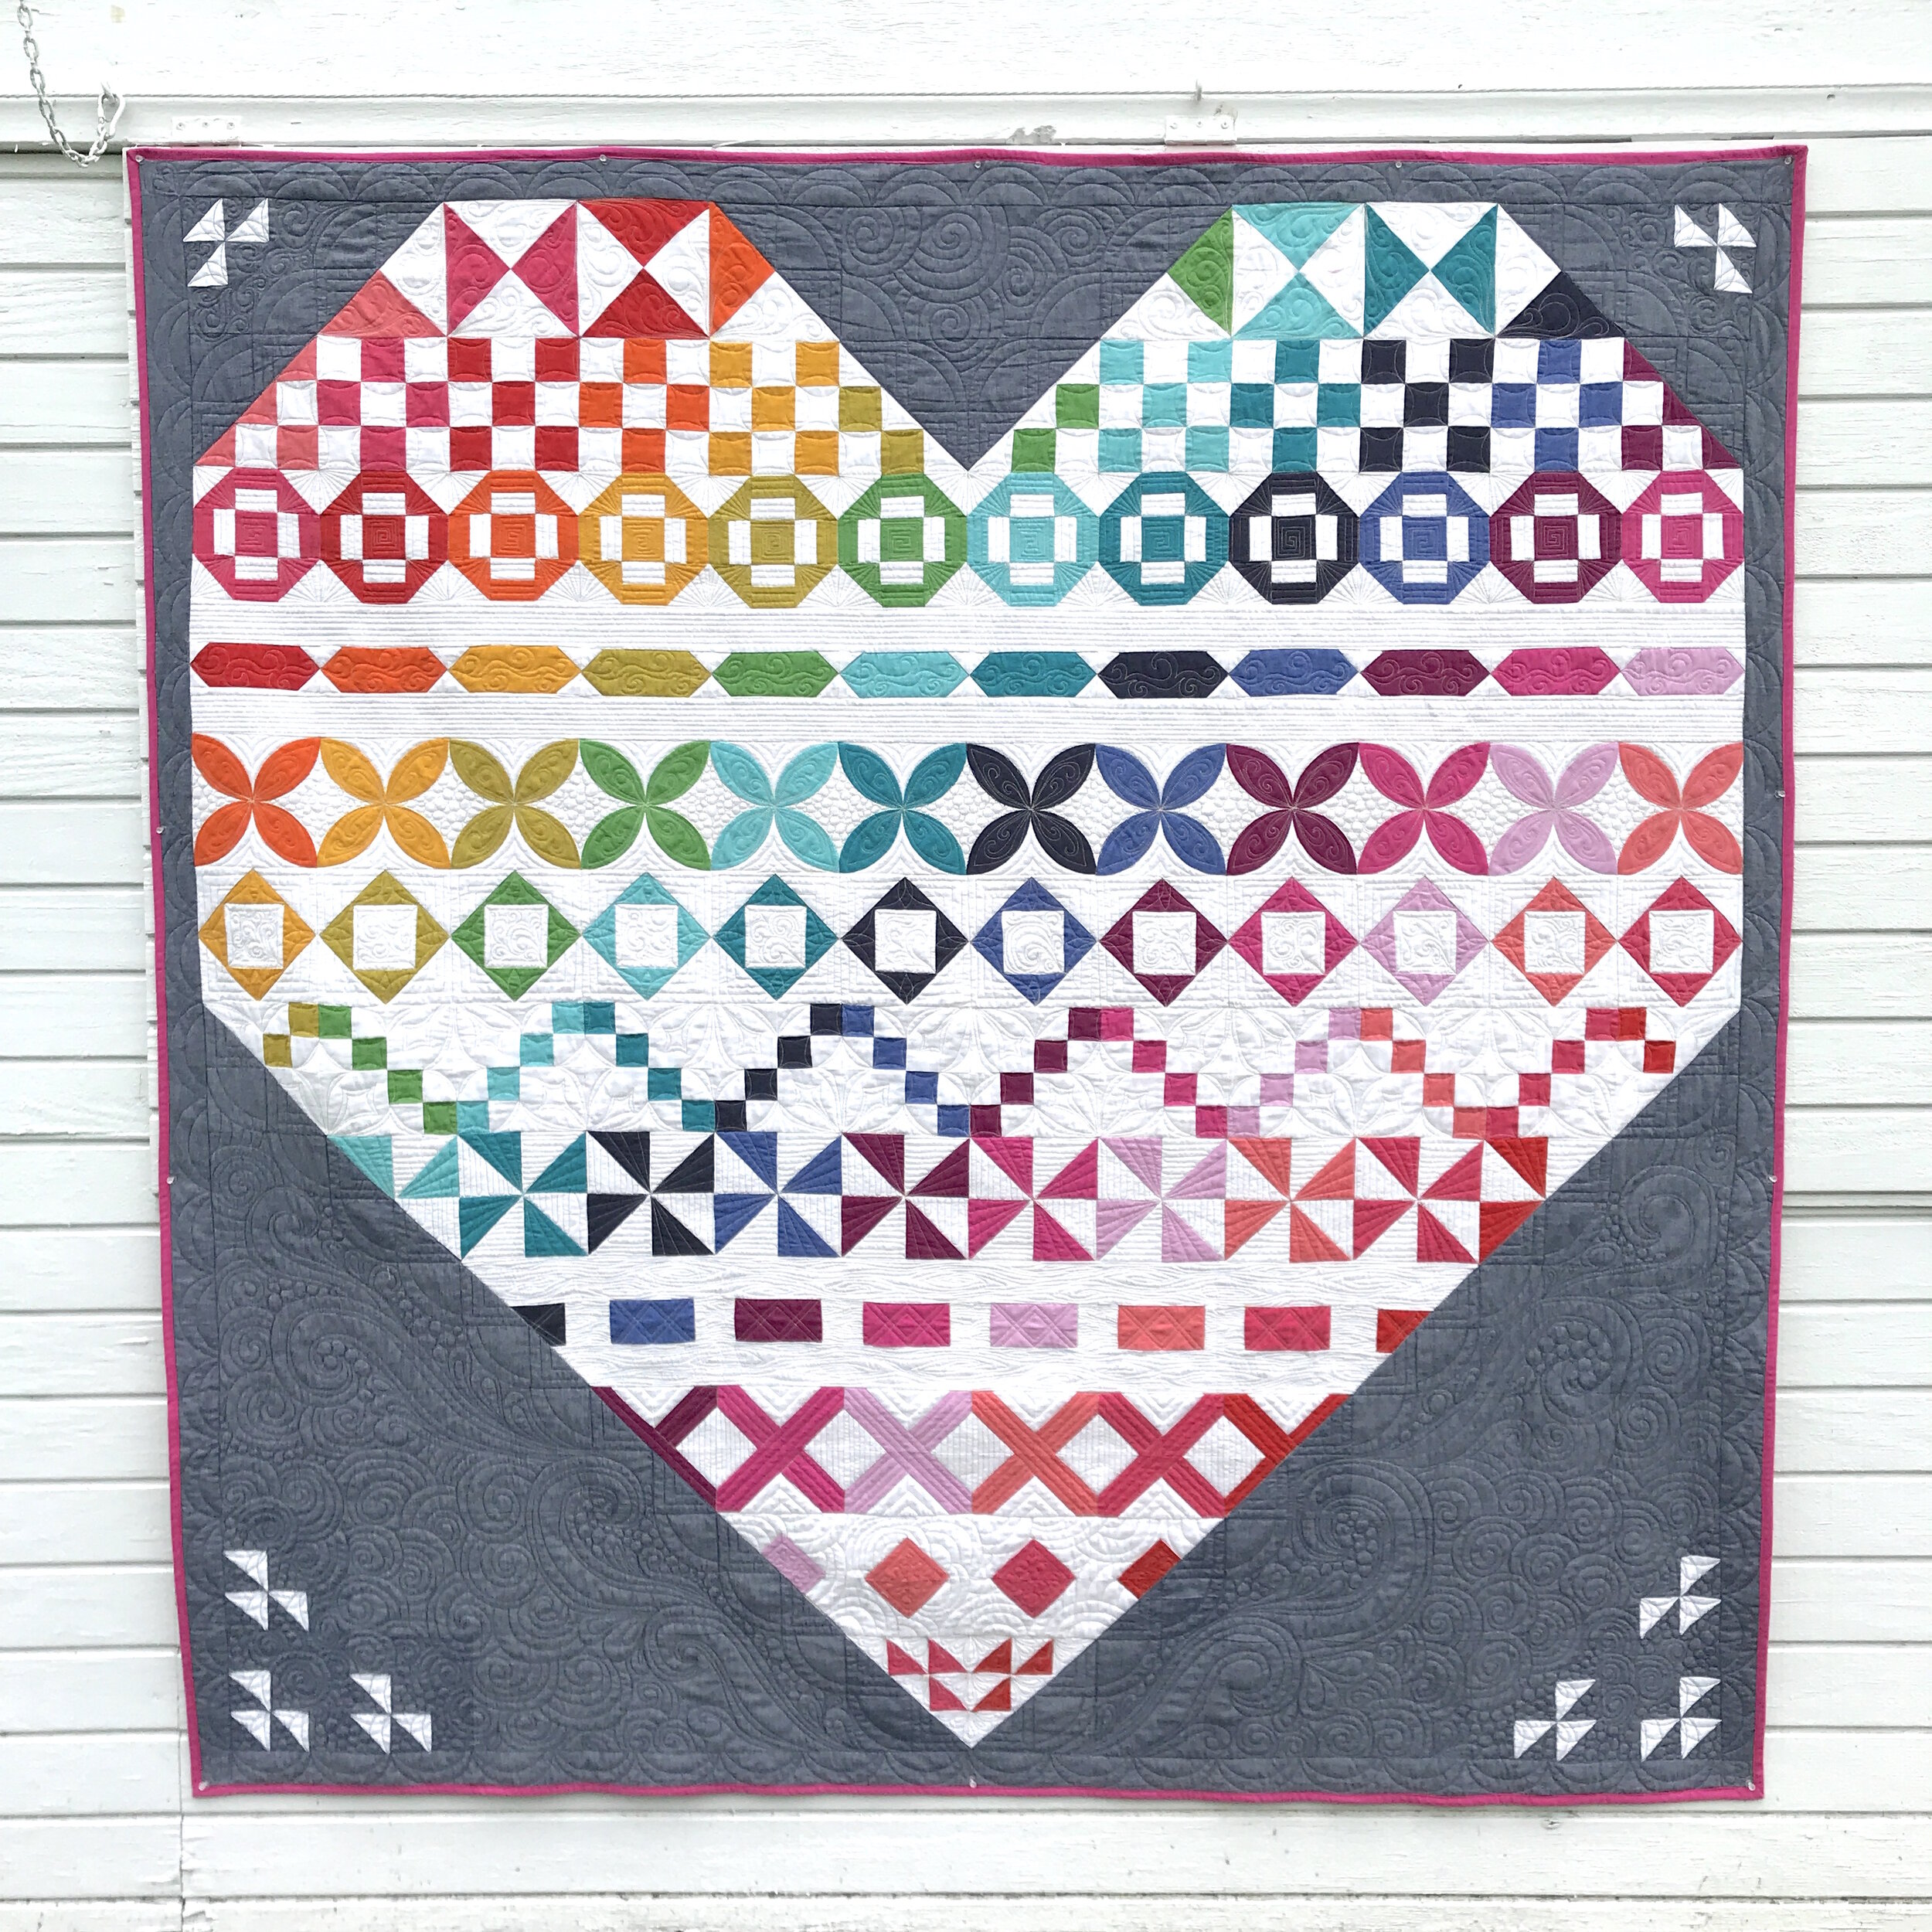 Conversation Sampler Rainbow Block of the Month by AnneMarie Chany